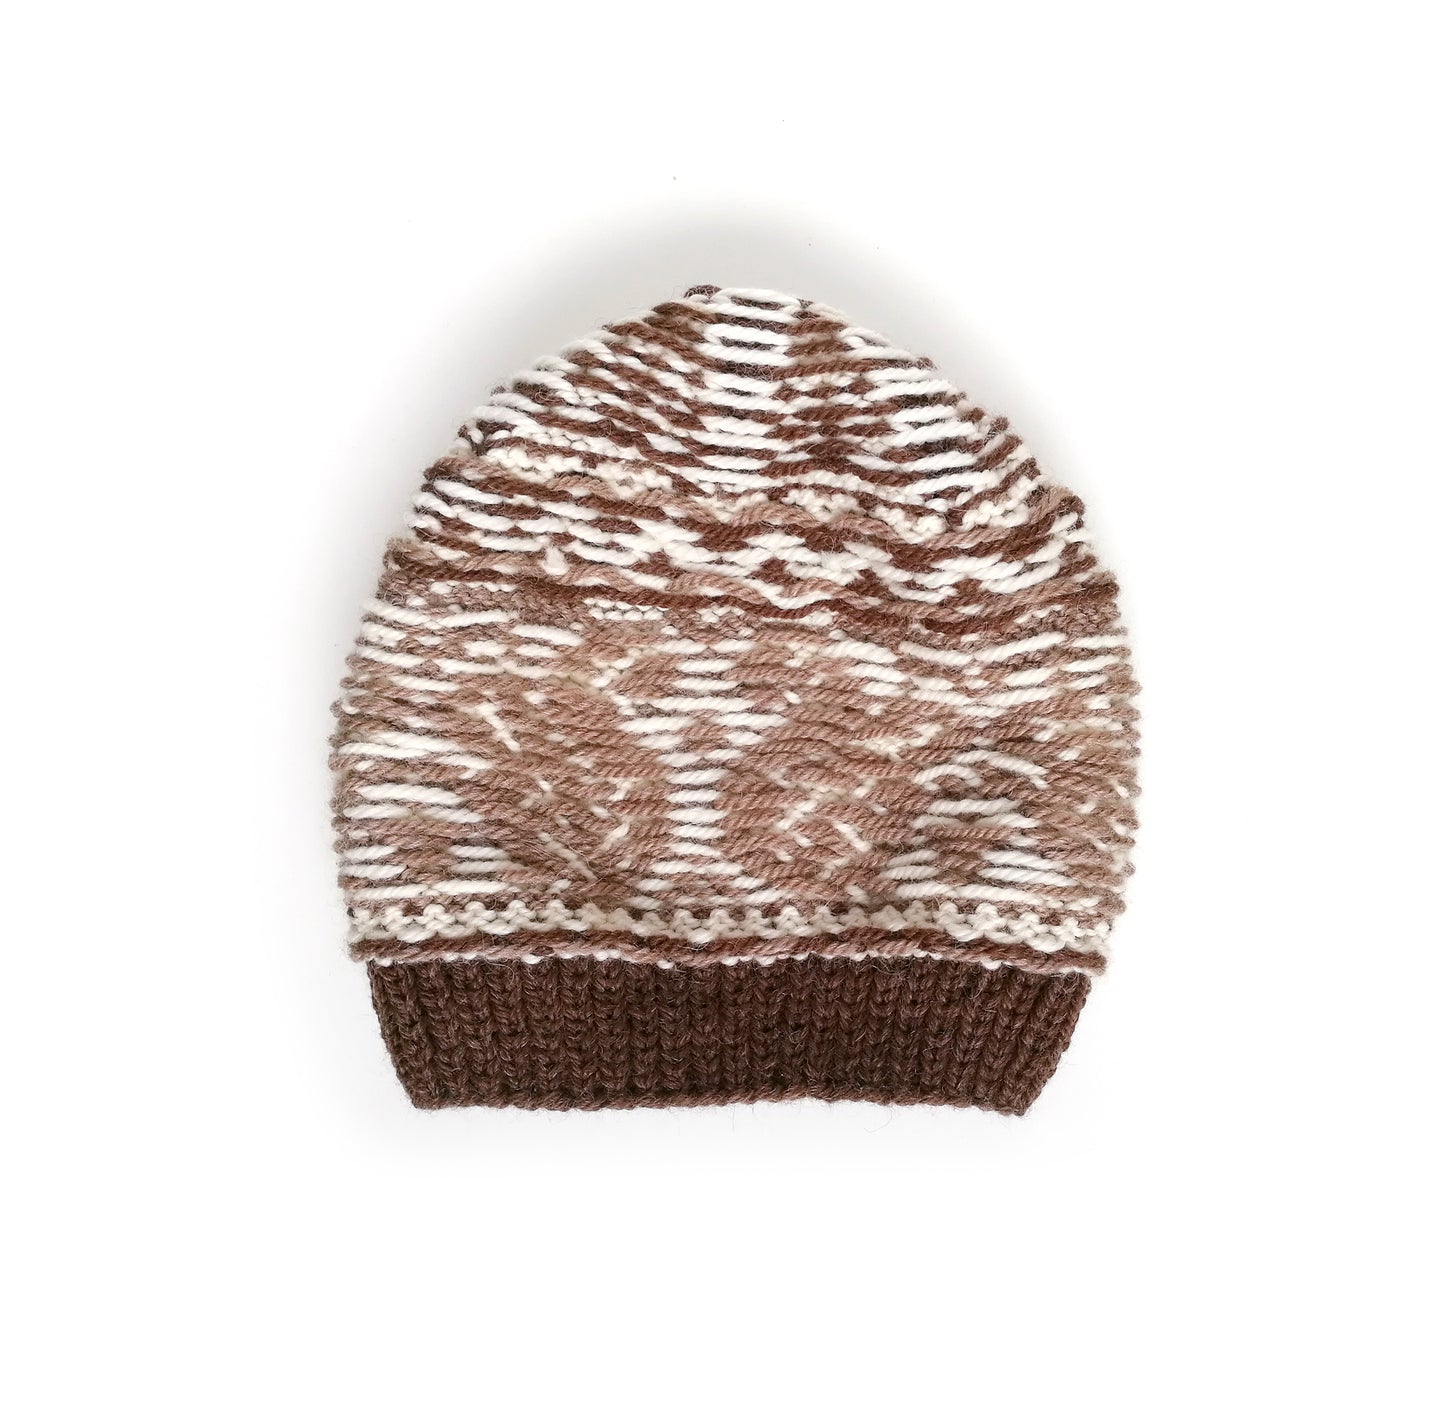 brown and white wool hand-knitted Fair Isle beanie hat in squirrel knitting pattern, wrong side